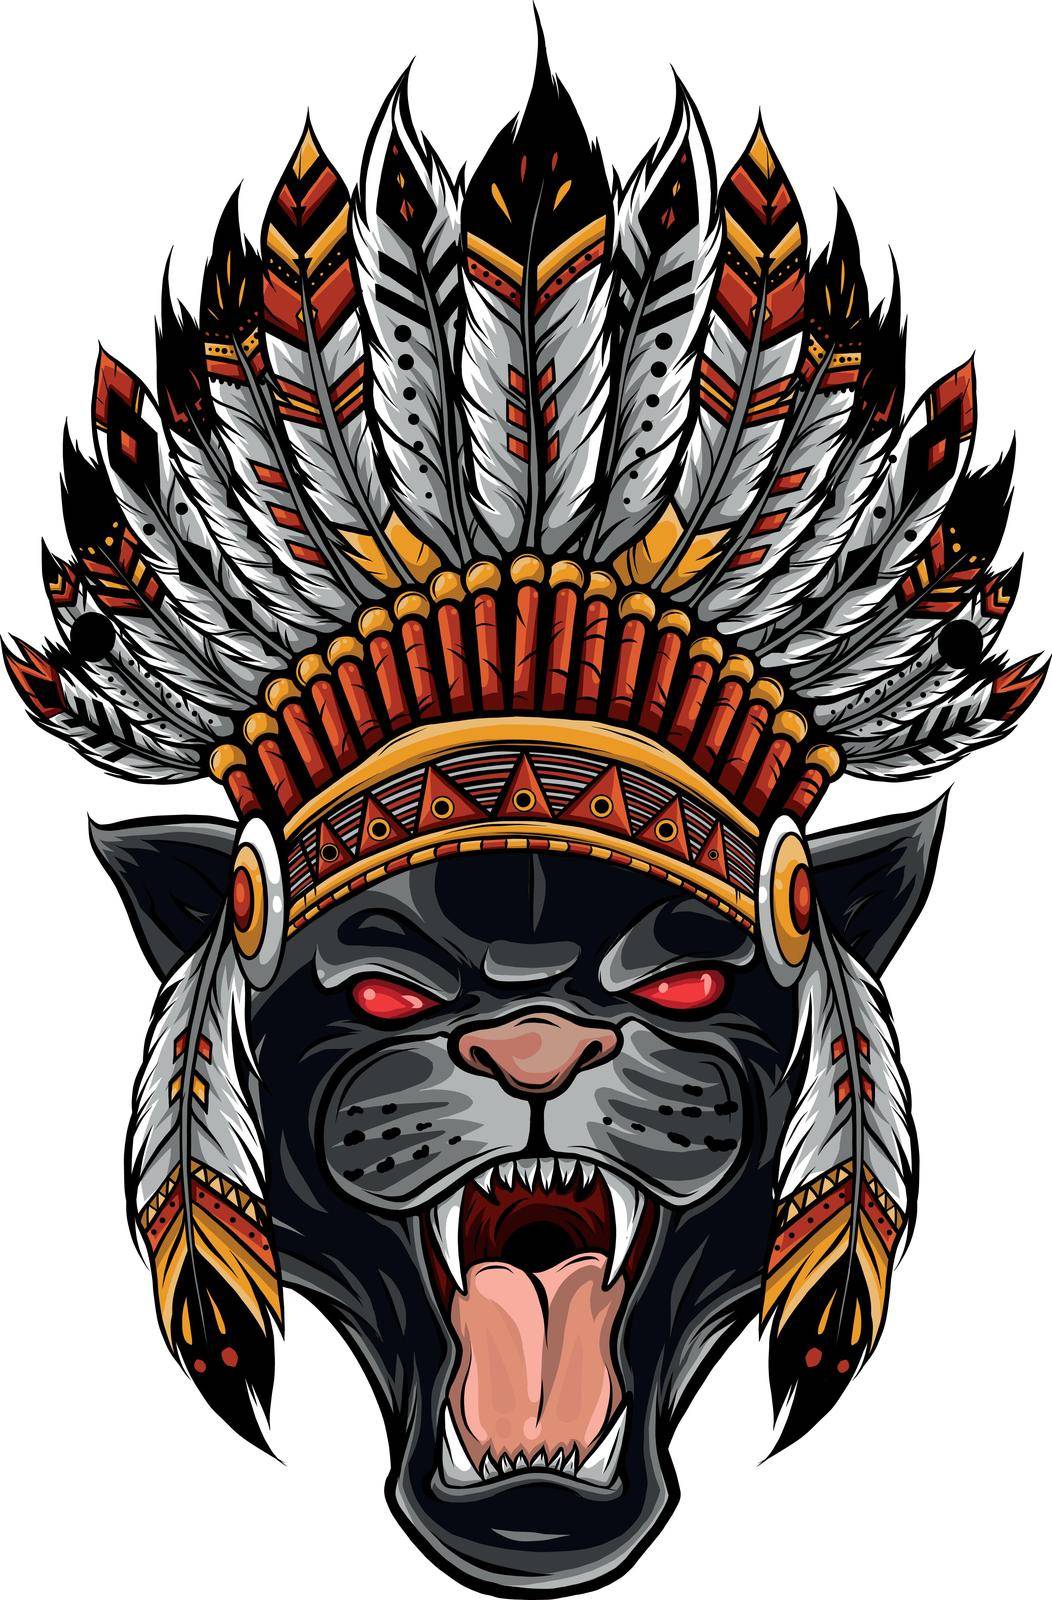 feline with native American Indian chief headdress.